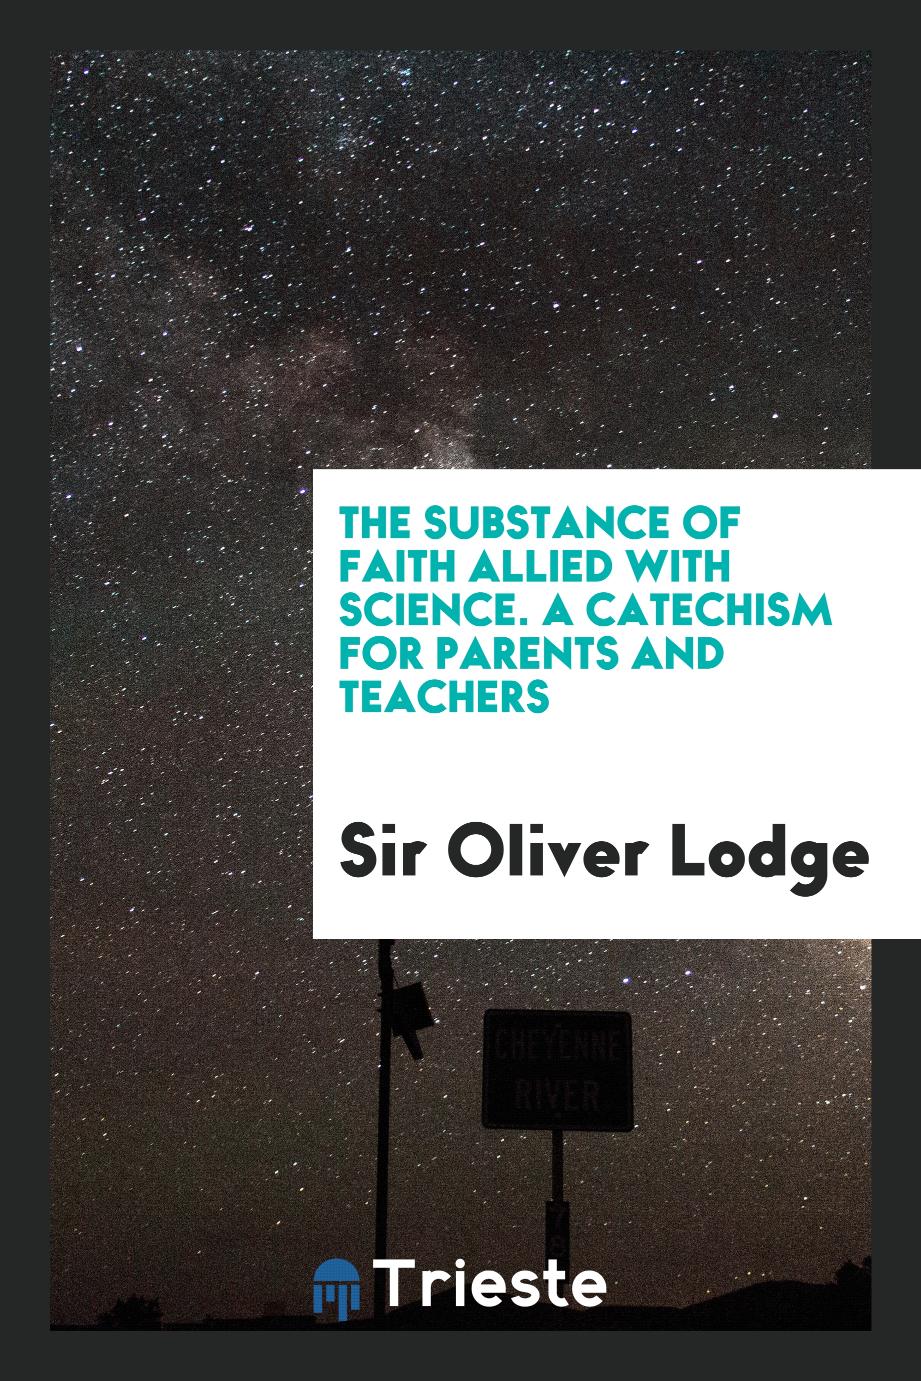 The substance of faith allied with science. A catechism for parents and teachers